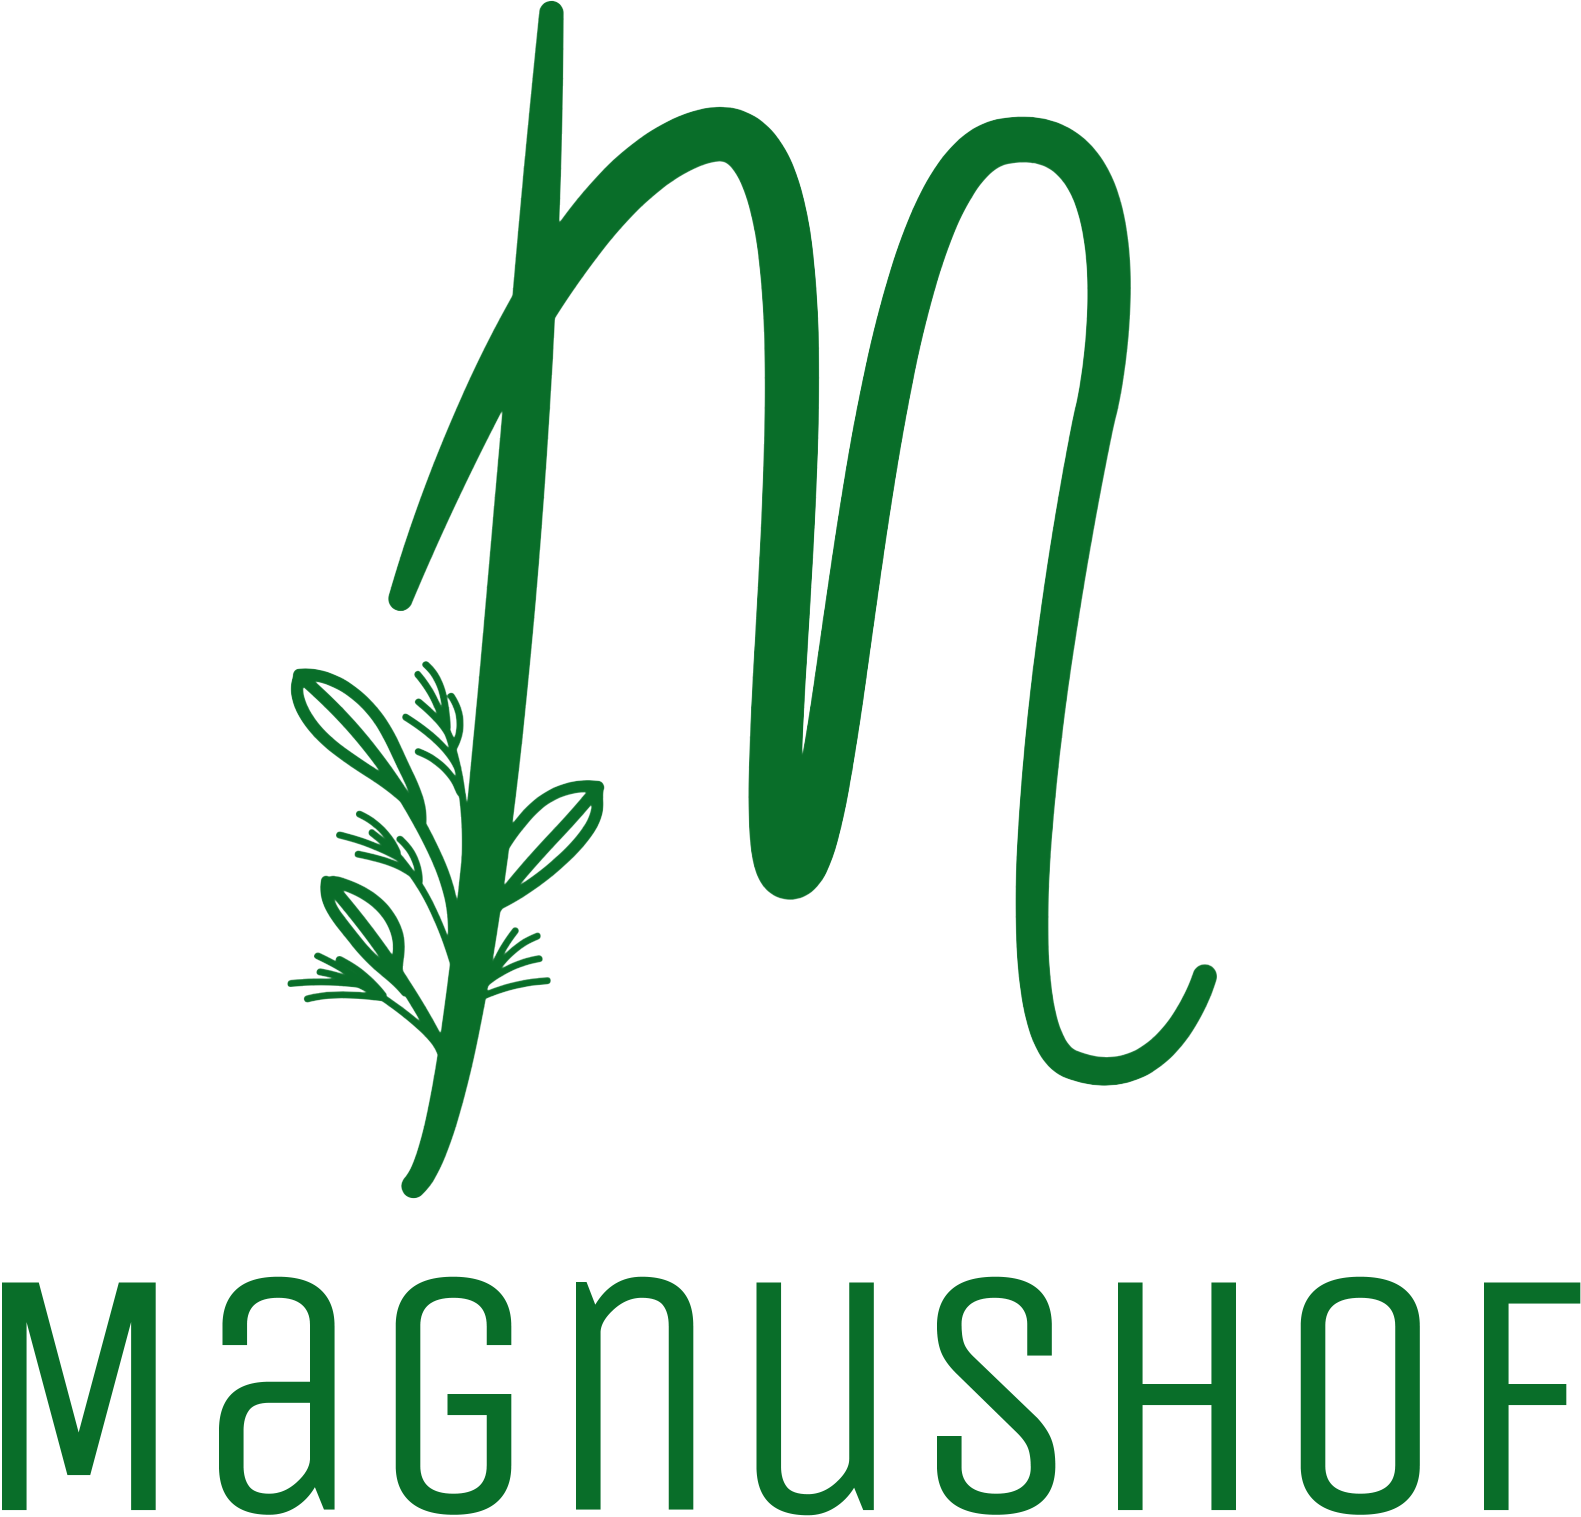 Magnushof guesthouse